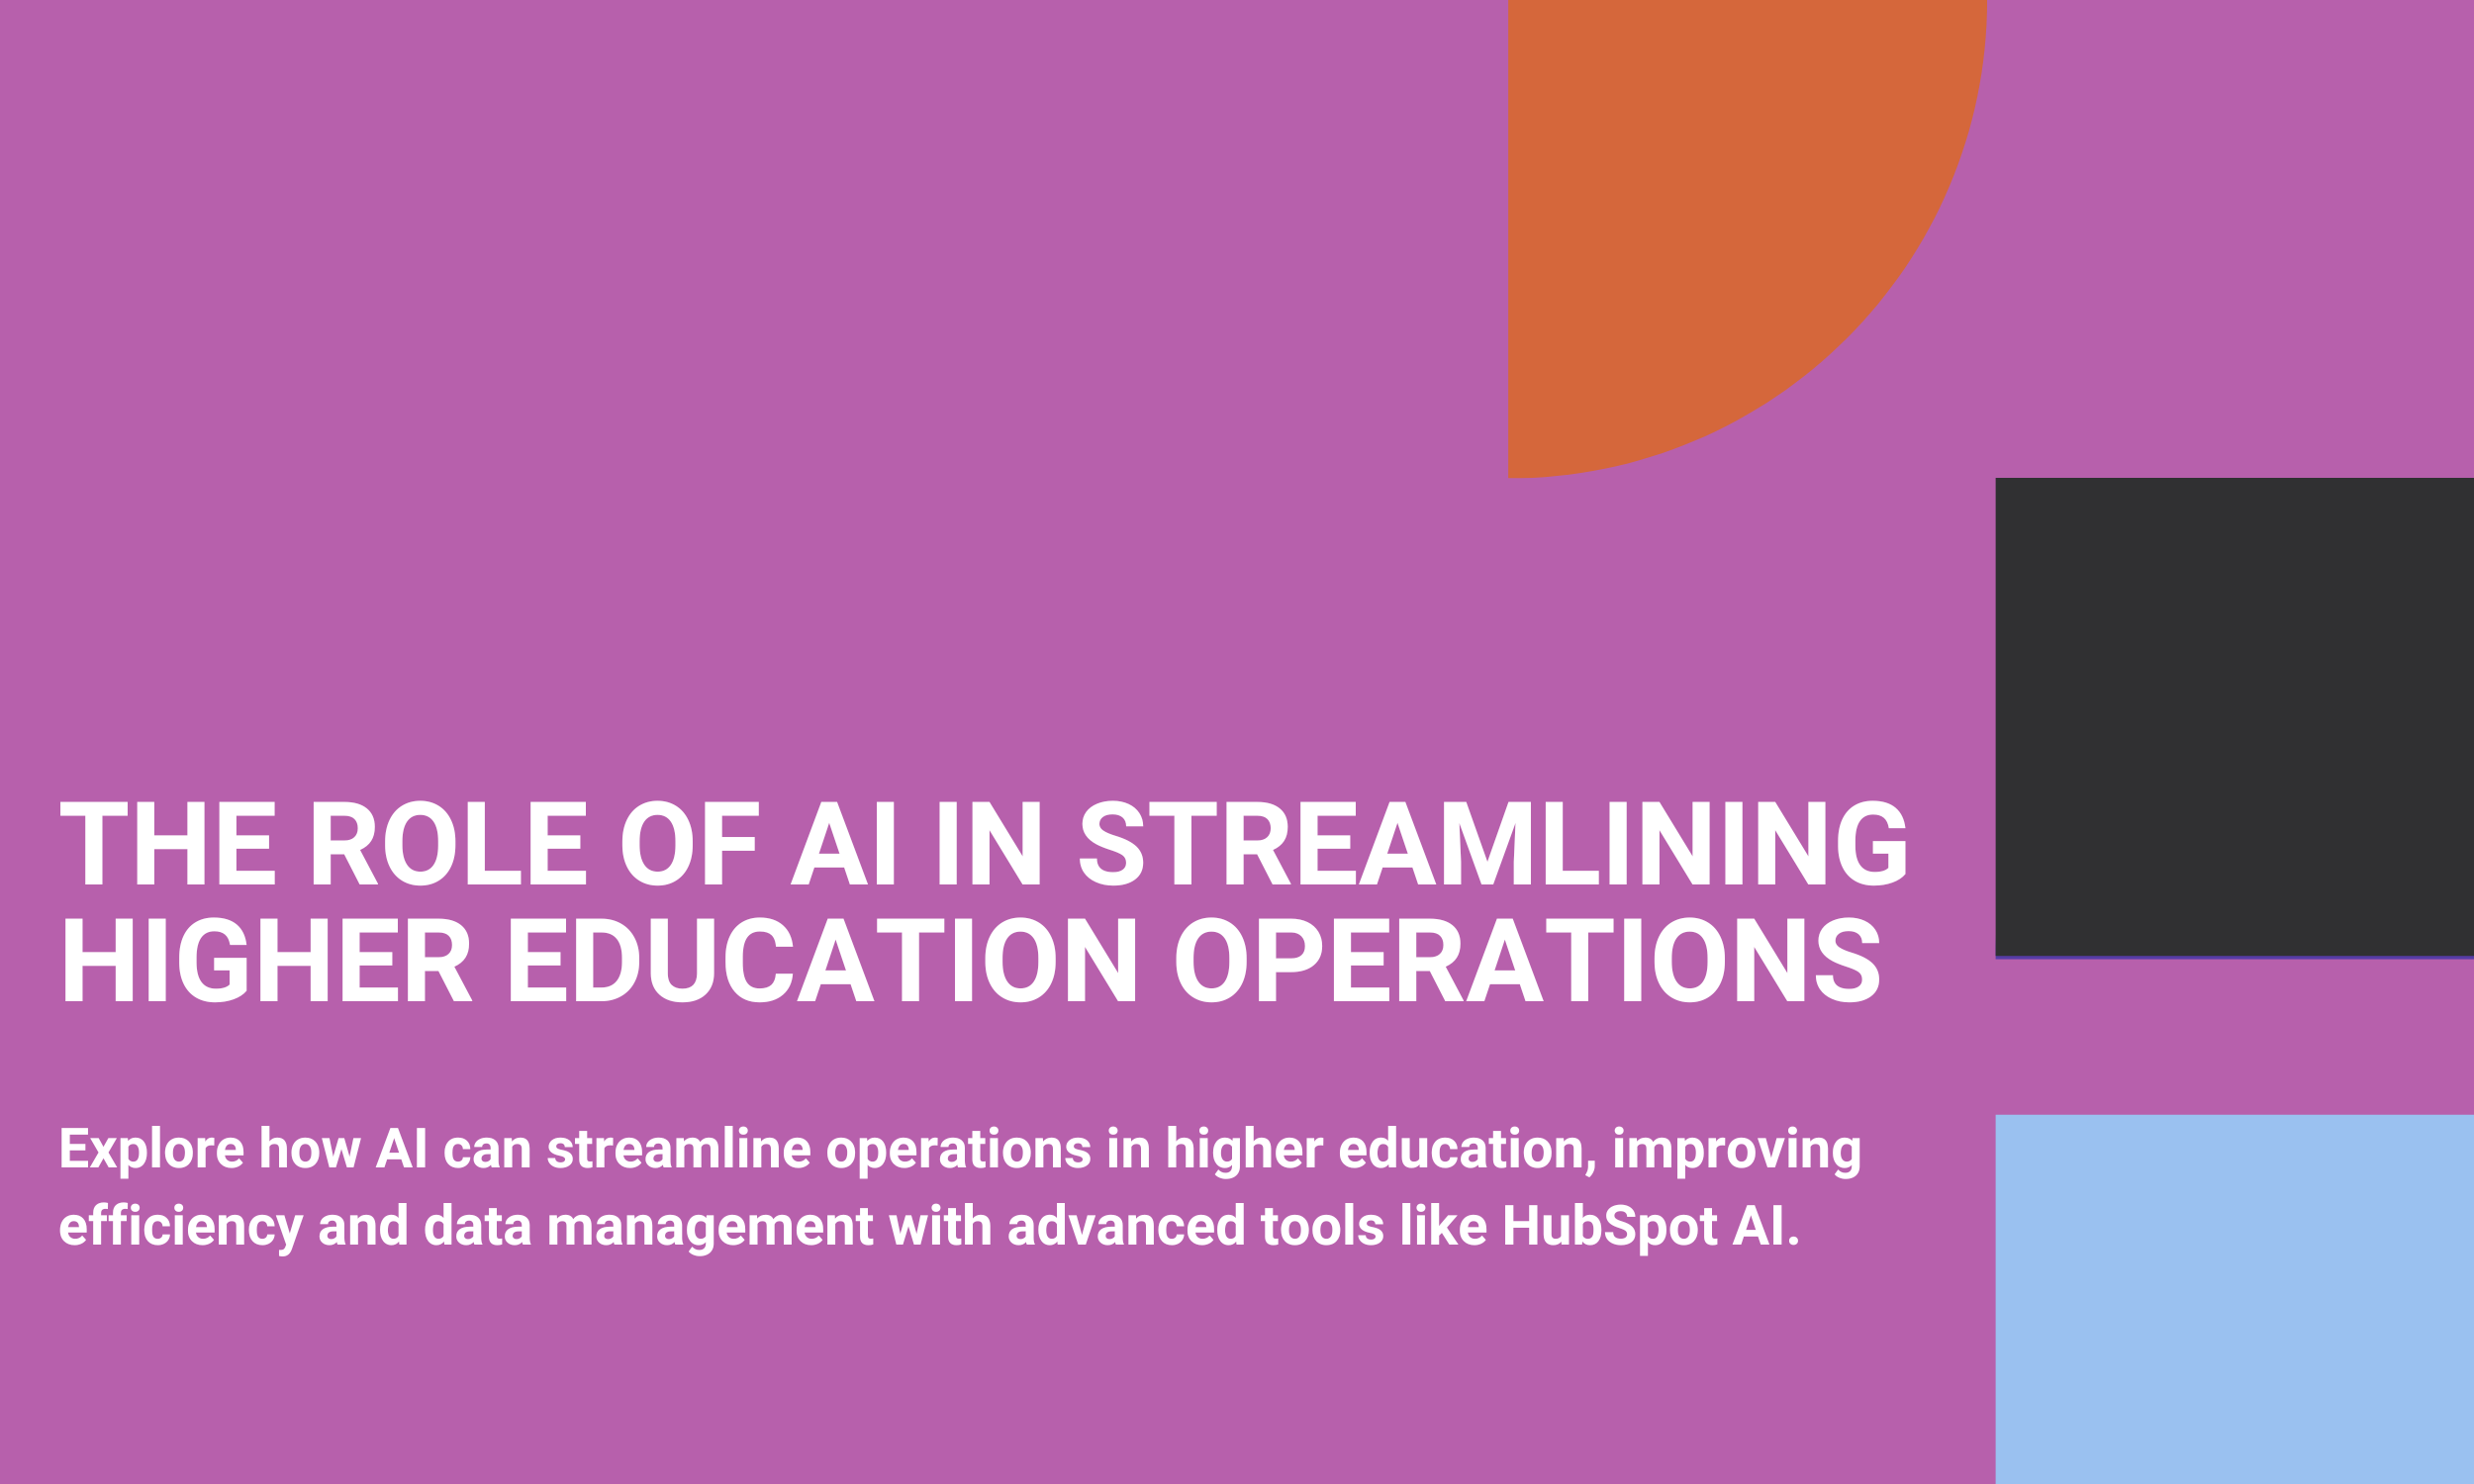 The Role of AI in Streamlining Higher Education Operations